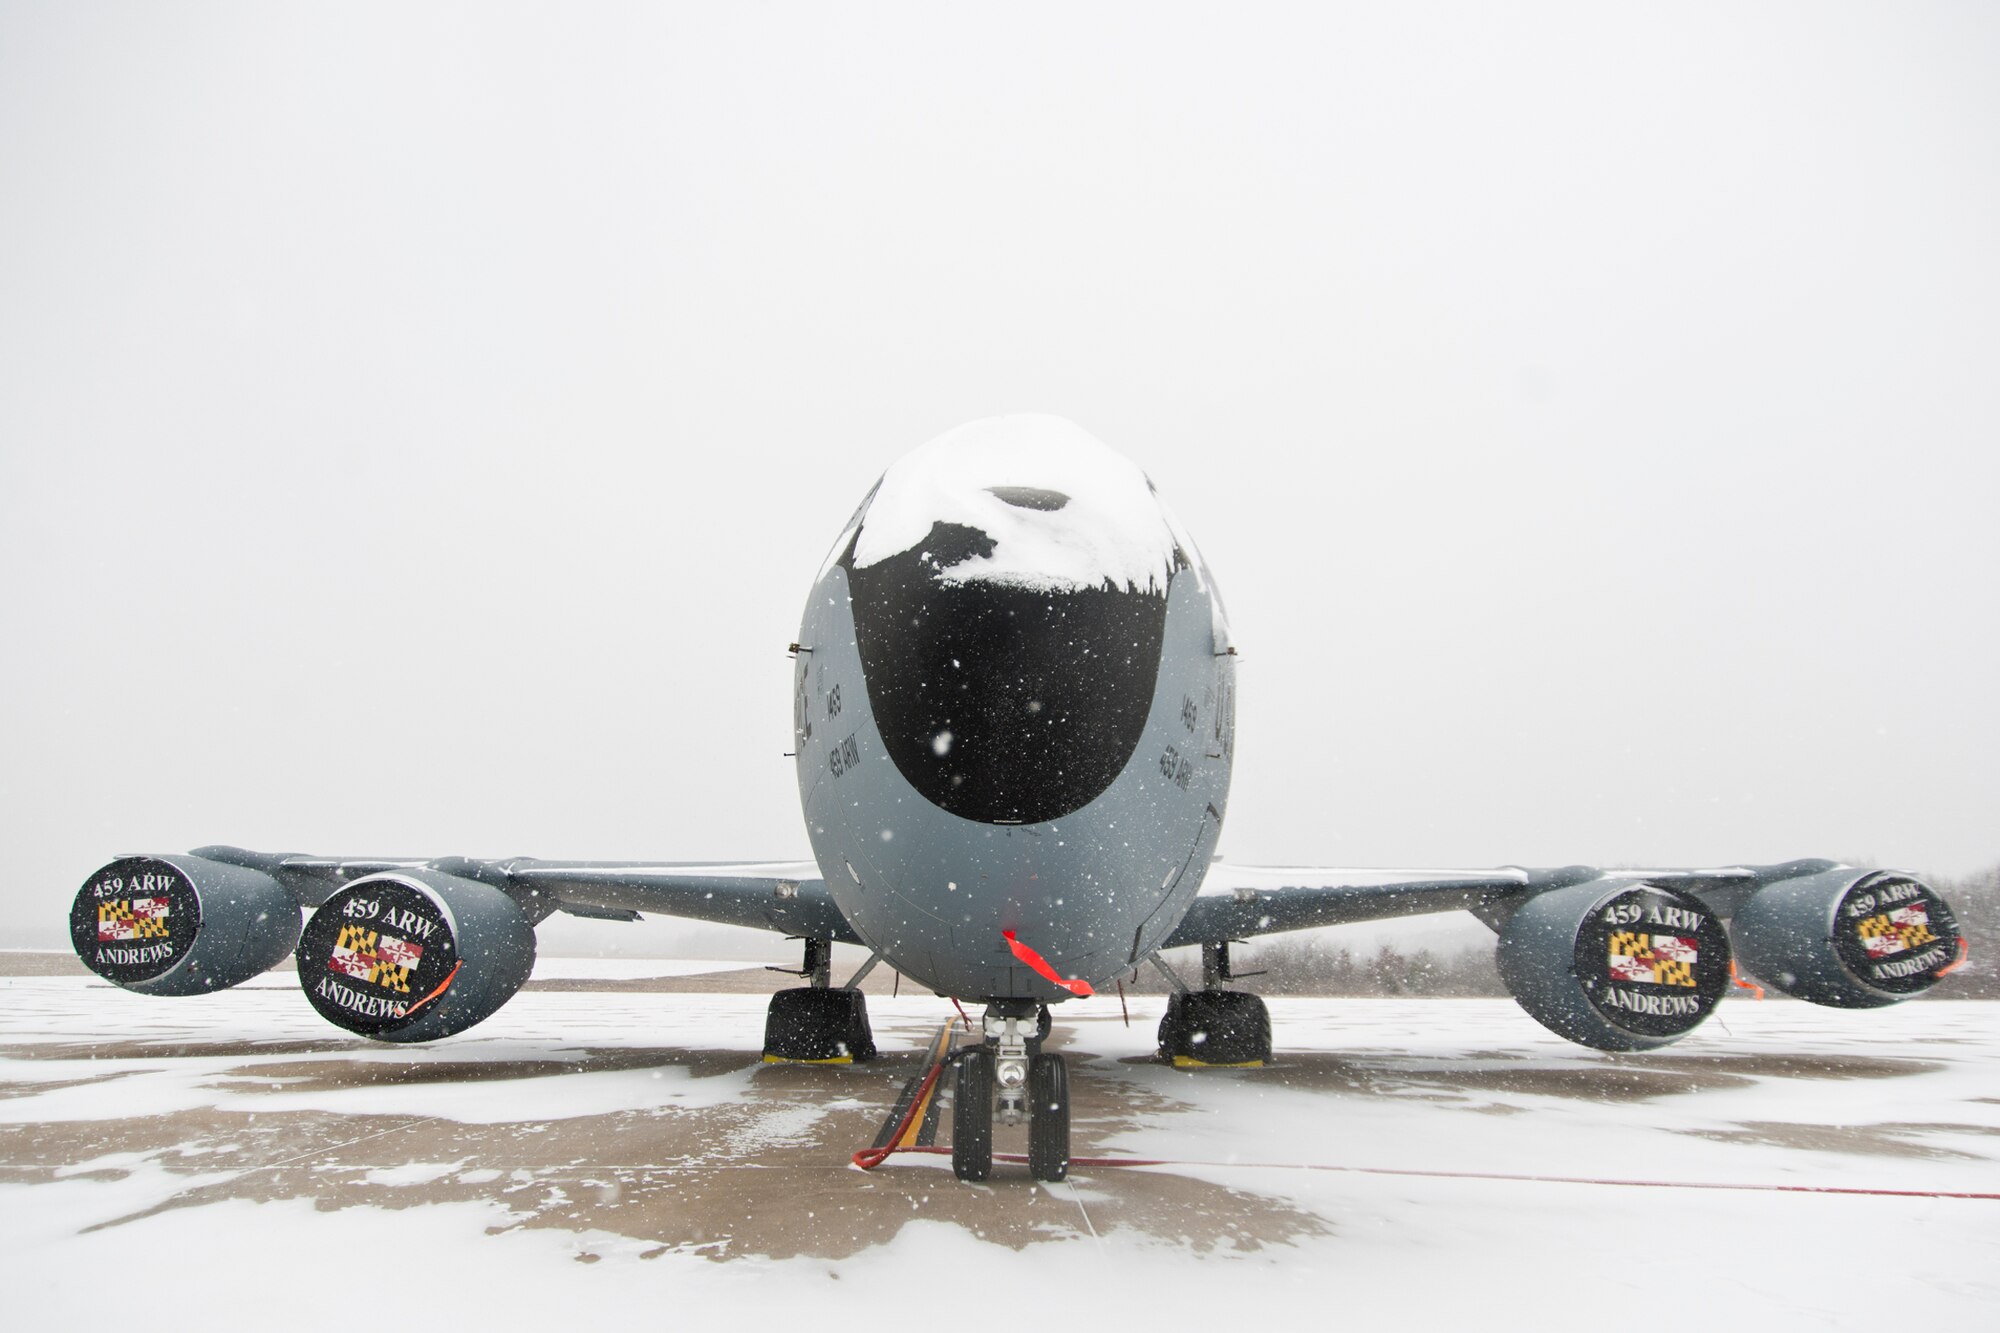 A KC-135R Stratotanker with the 459th Air Refueling Wing rests on the Joint Base Andrews, Maryland, flight line during the region's first winter storm of the season Jan. 8, 2017. Up to two inches fell in parts of the National Capital Region during the 459th's drill weekend. (U.S. Air Force photo/Tech. Sgt. Kat Justen)